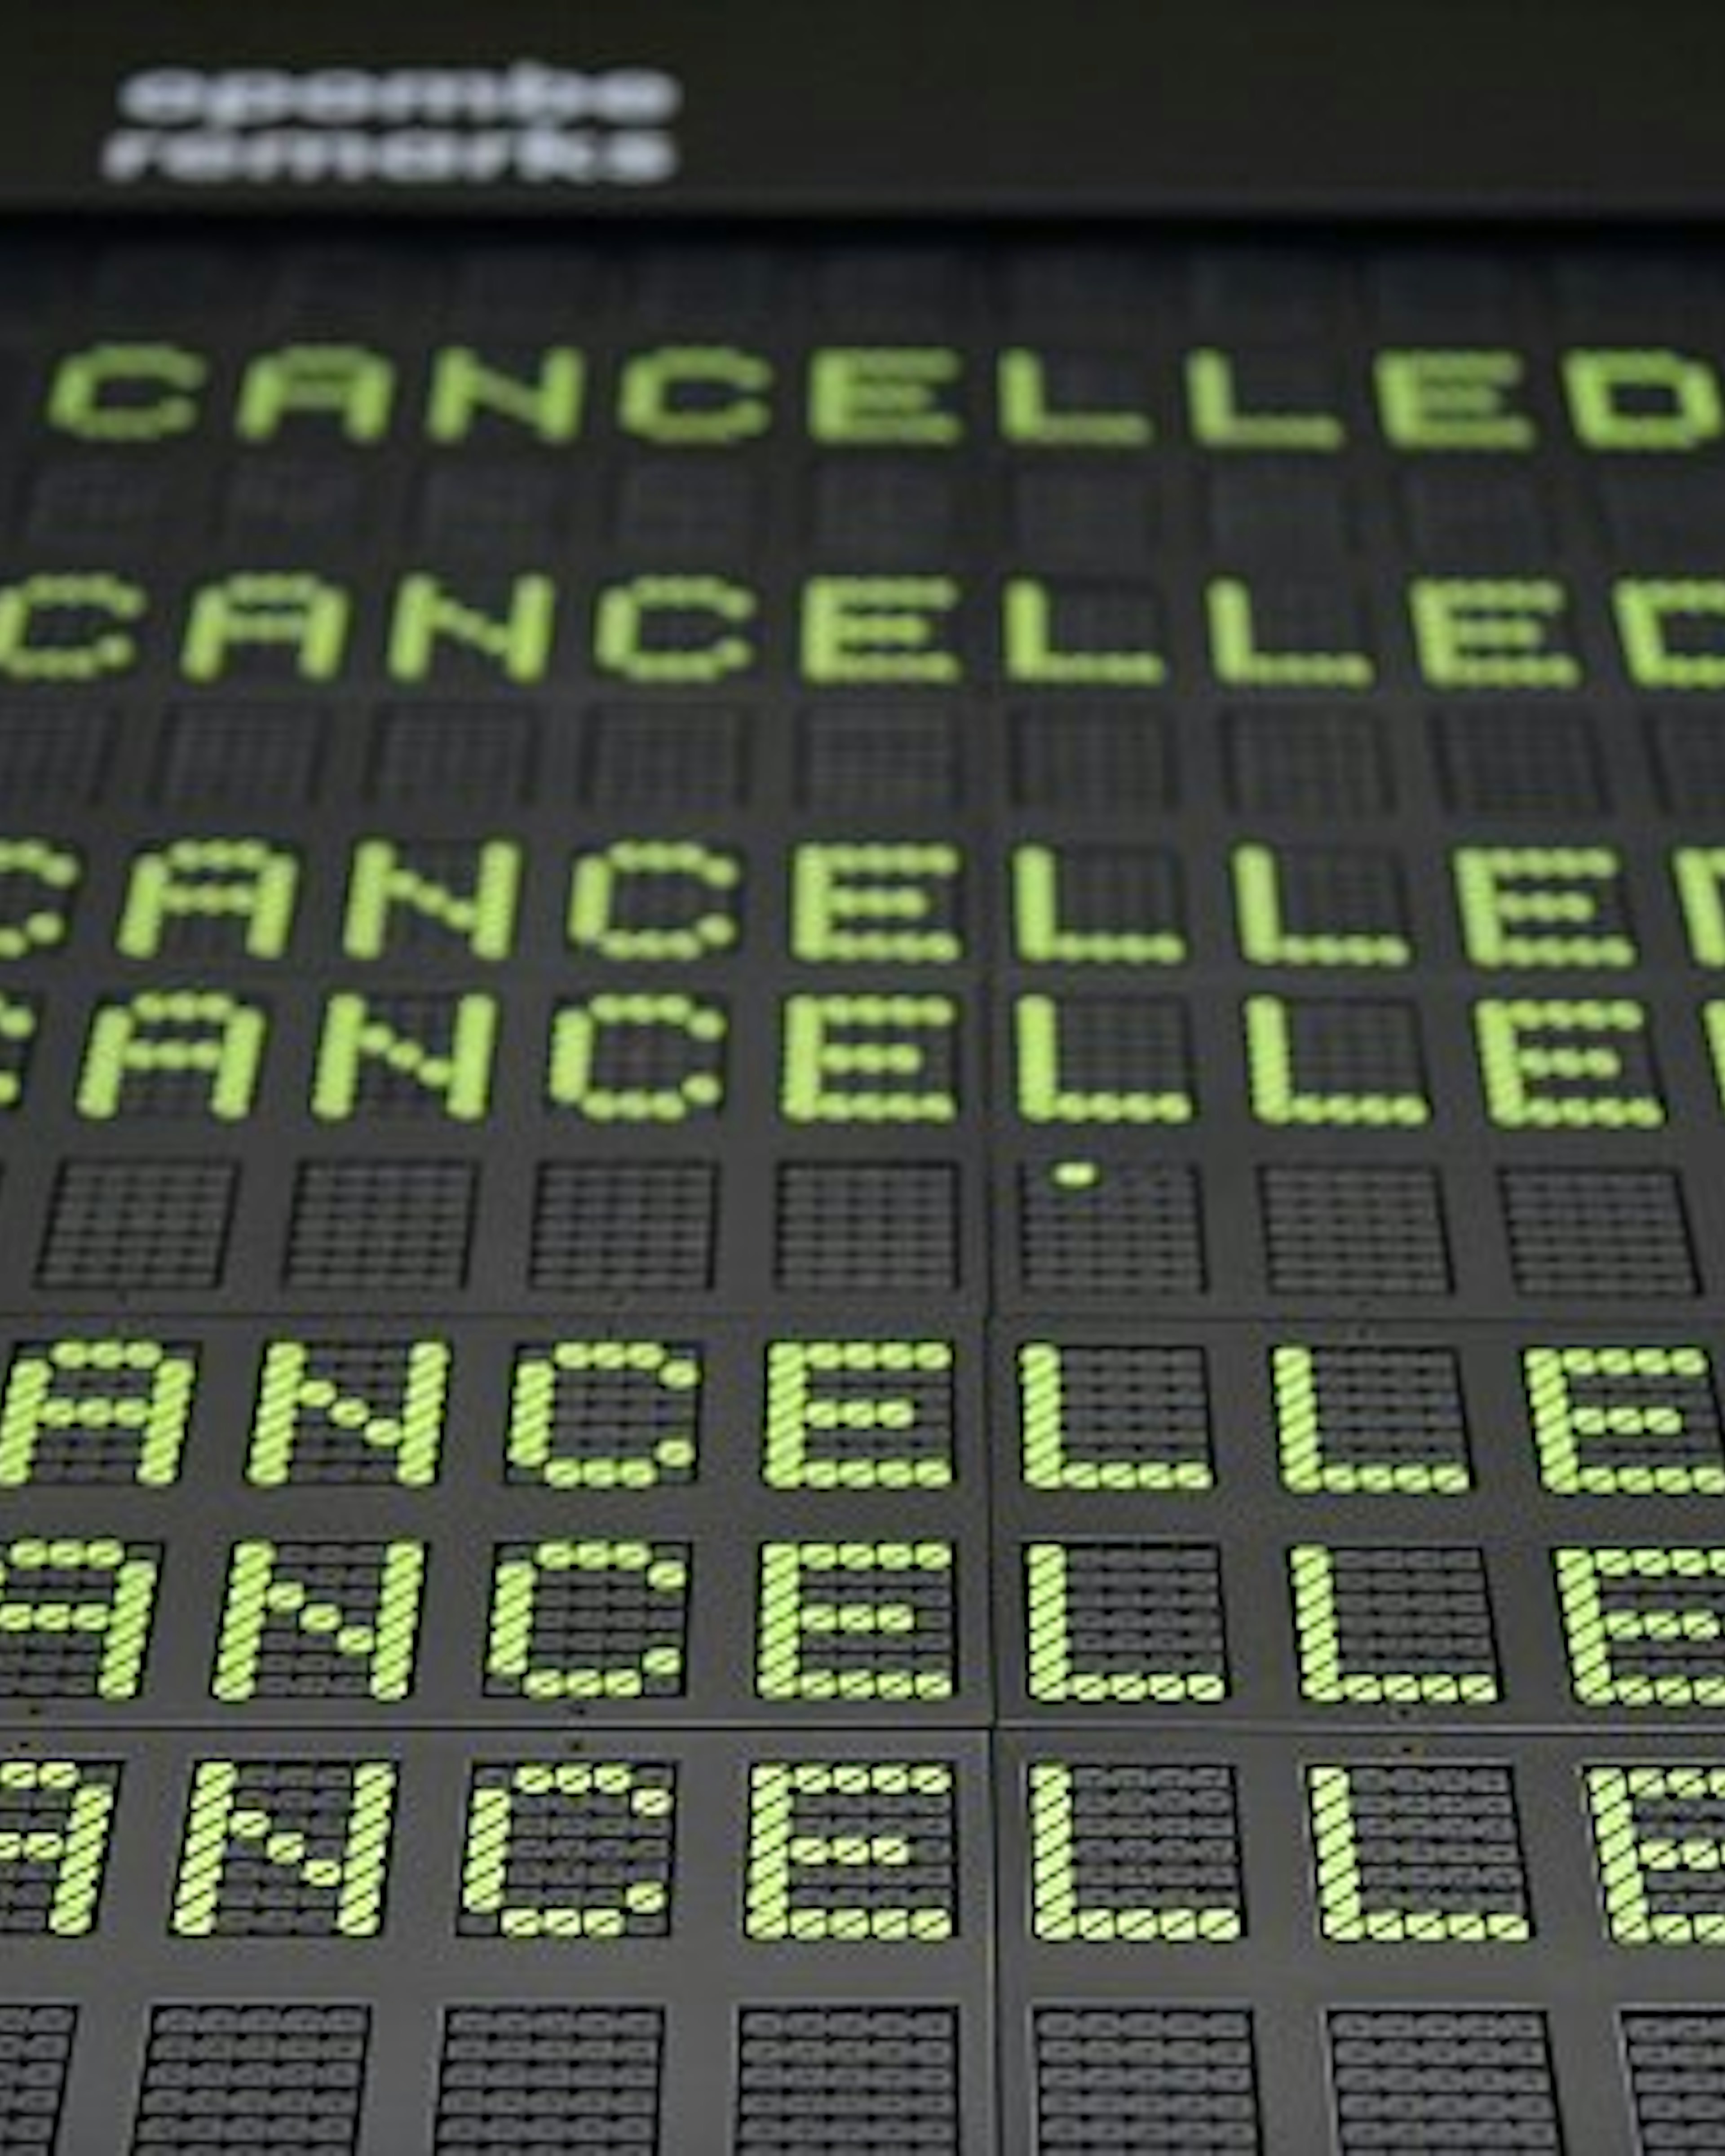 An information board at the Ljubljana Joze Pucnik Airport displays cancelled flights of Slovenian flag carrier Adria Airways in Brnik, Slovenia, on September 24, 2019.